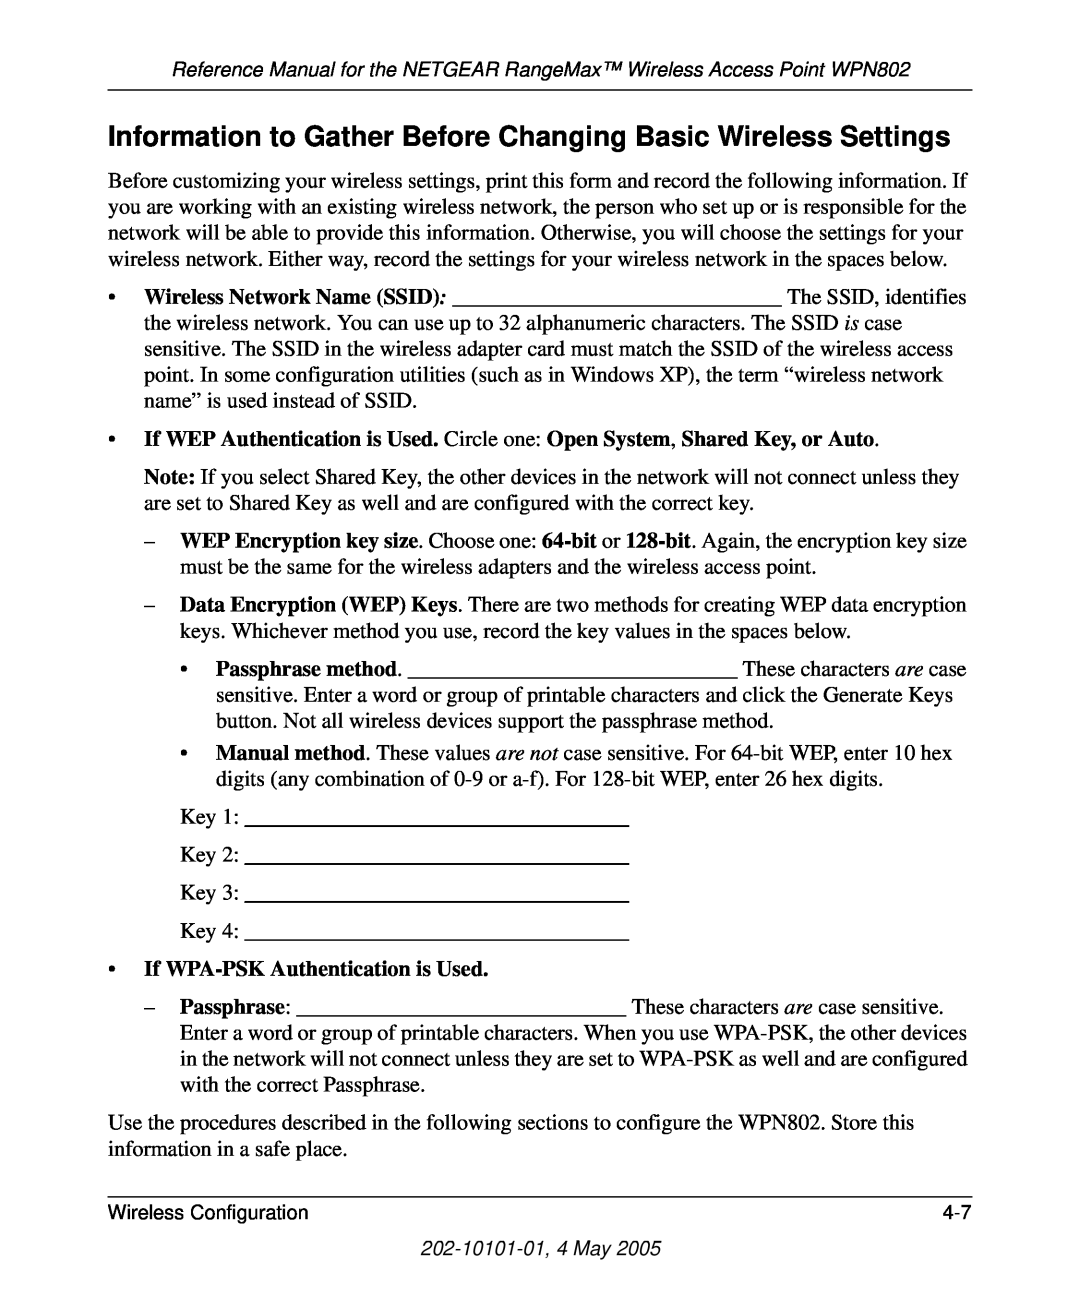 NETGEAR WPN802 manual Information to Gather Before Changing Basic Wireless Settings, If WPA-PSK Authentication is Used 